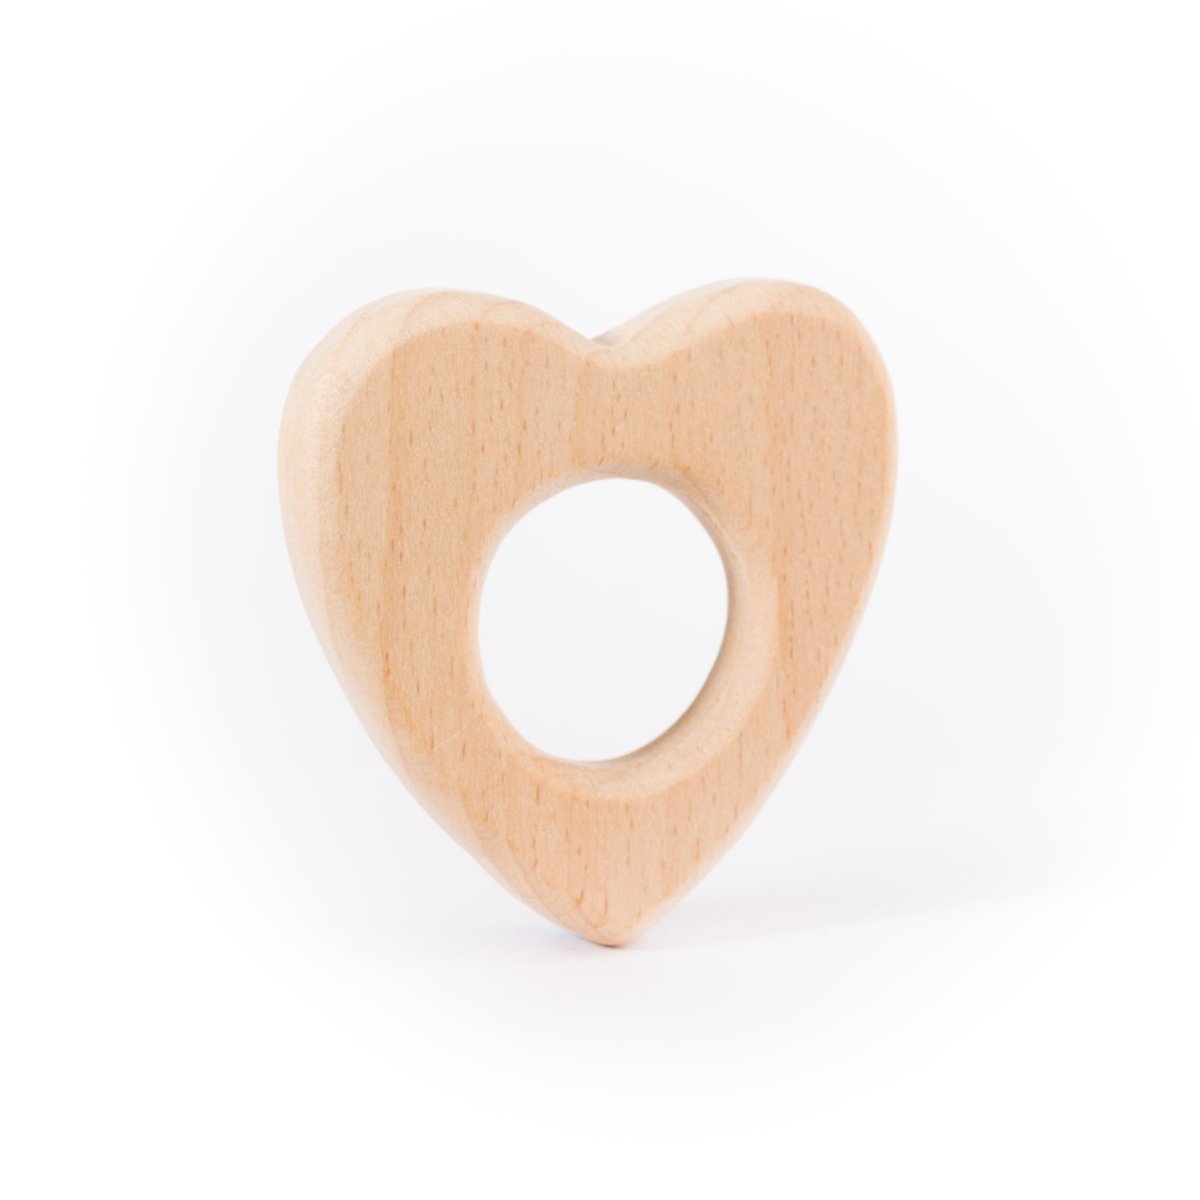 Wood Rings & Pendants Small - Beech Wood Heart from Cara & Co Craft Supply